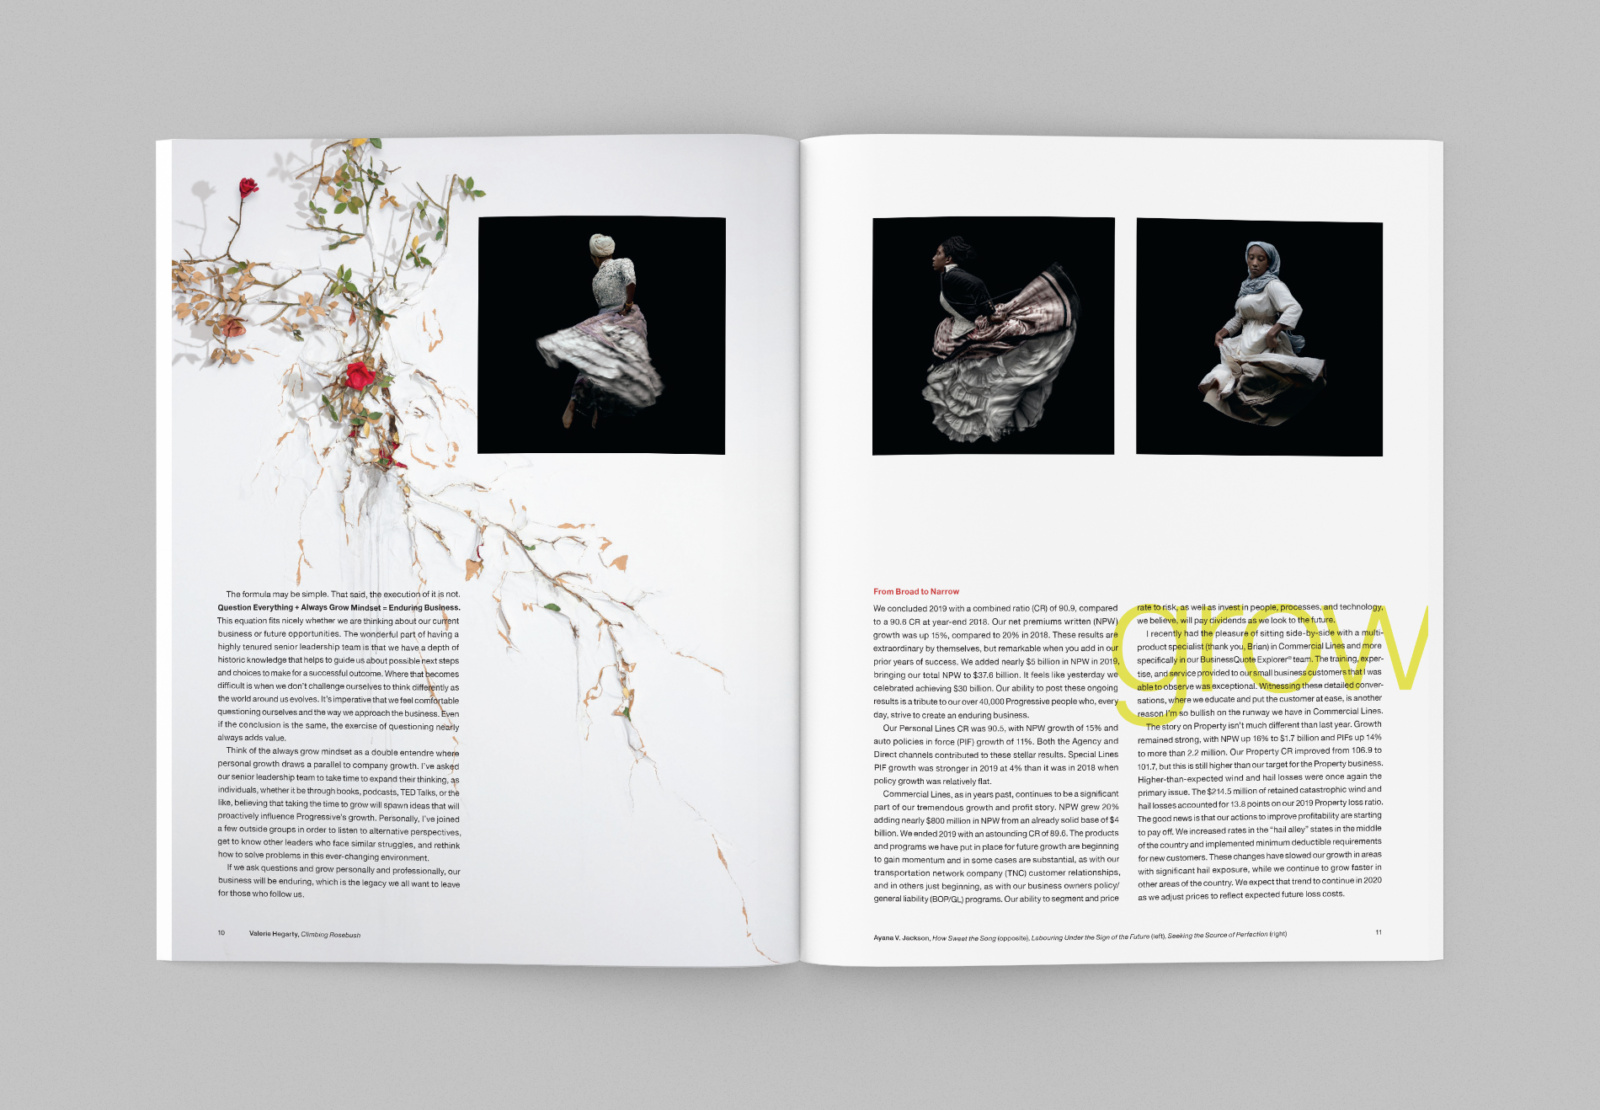 Spread from the 2019 Progressive Corporation annual report design featuring Valerie Hegarty and Ayana V. Jackson artworks